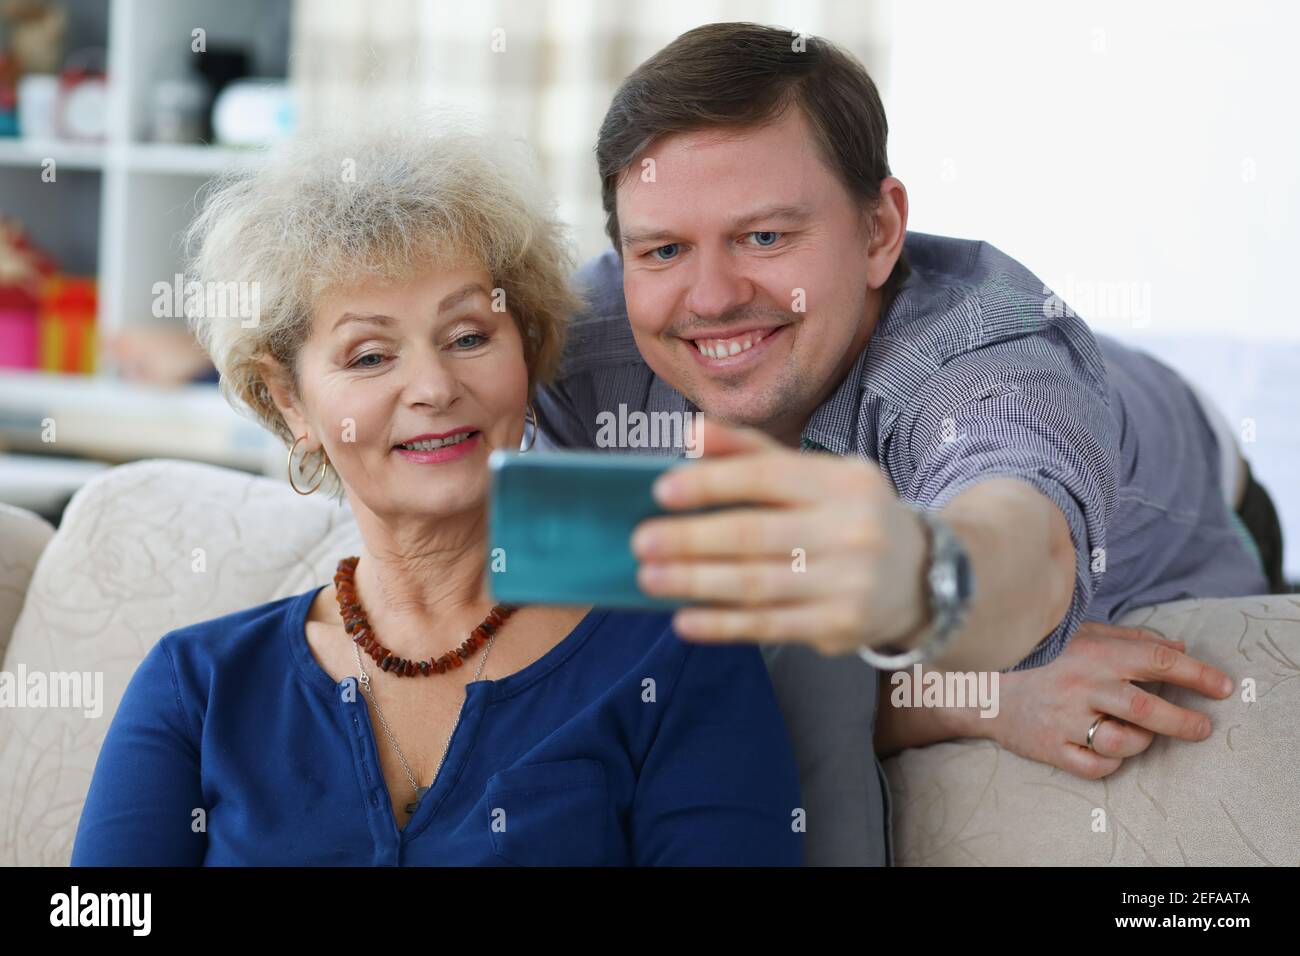 Young man takes selfie on smartphone with his mom Stock Photo